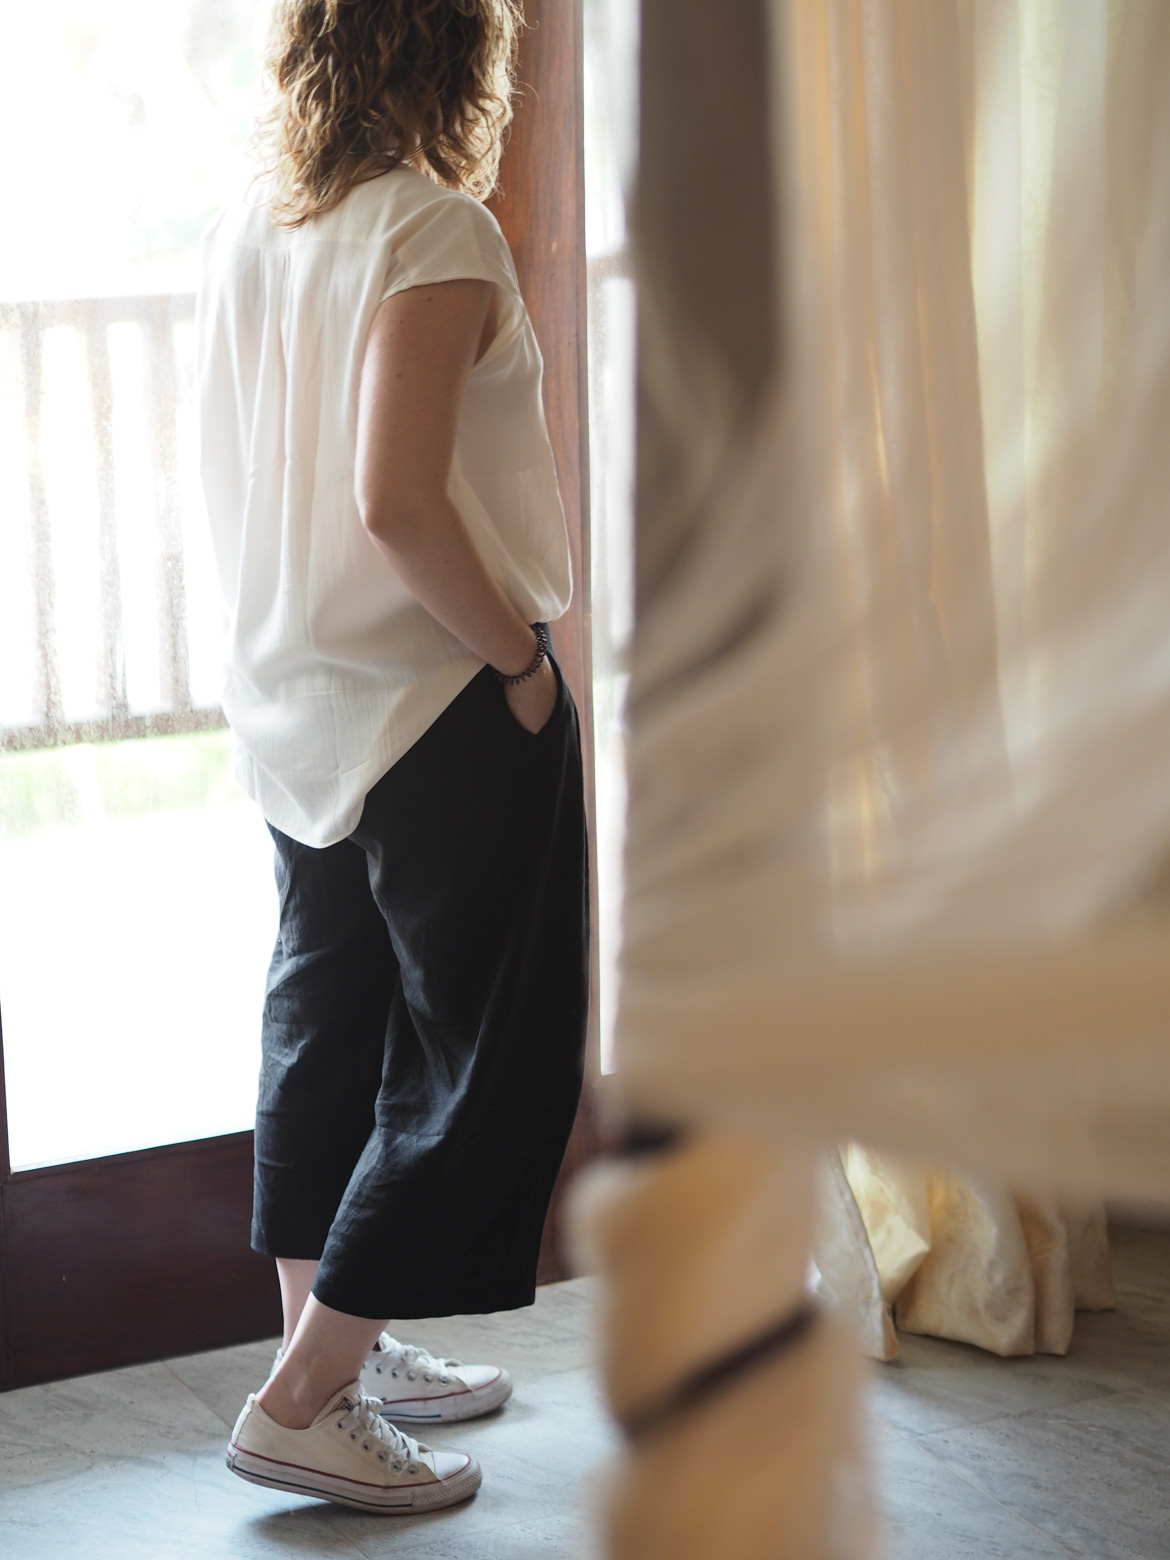 The Black Linen Trousers I Wear for Work and Leisure - Tropikelle